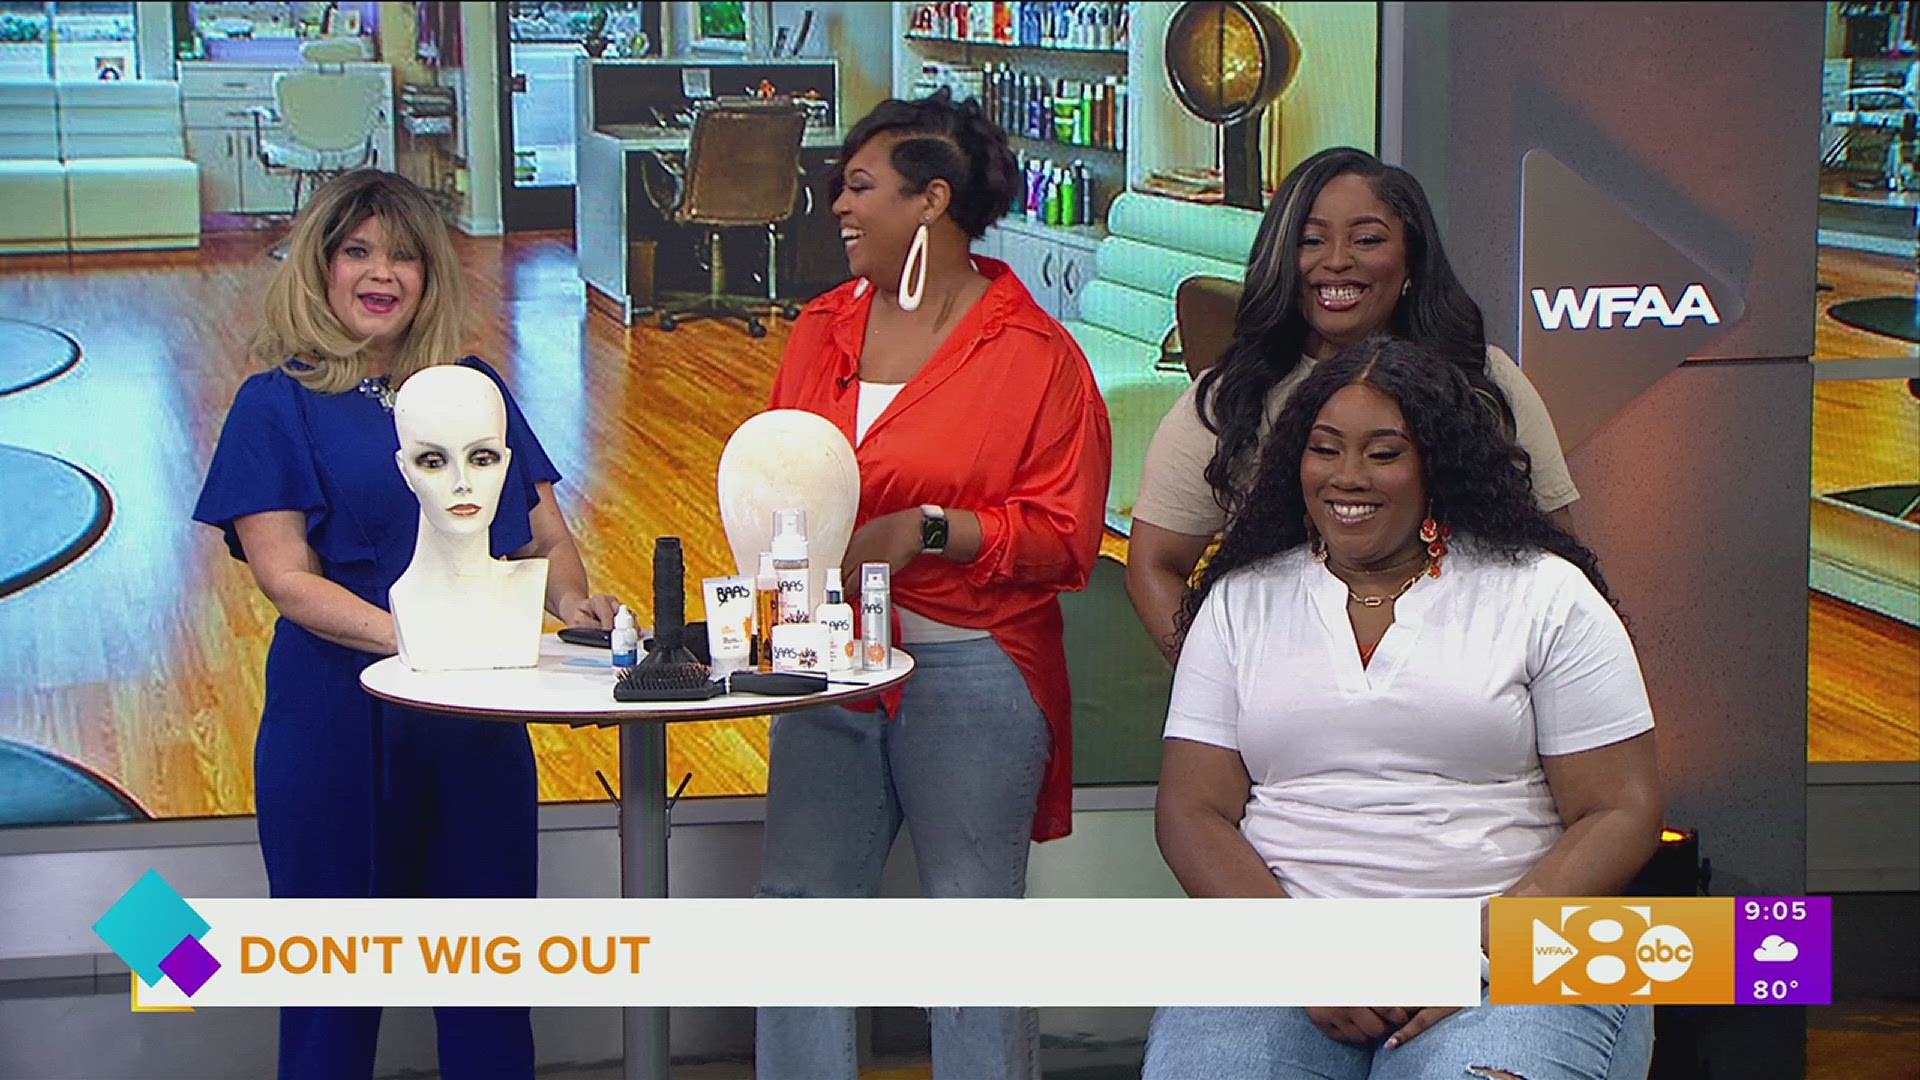 Latarah Edmond with Good Day Hair Salon shares tips to make your wig stay on. Go to goodhairday.net for more information.